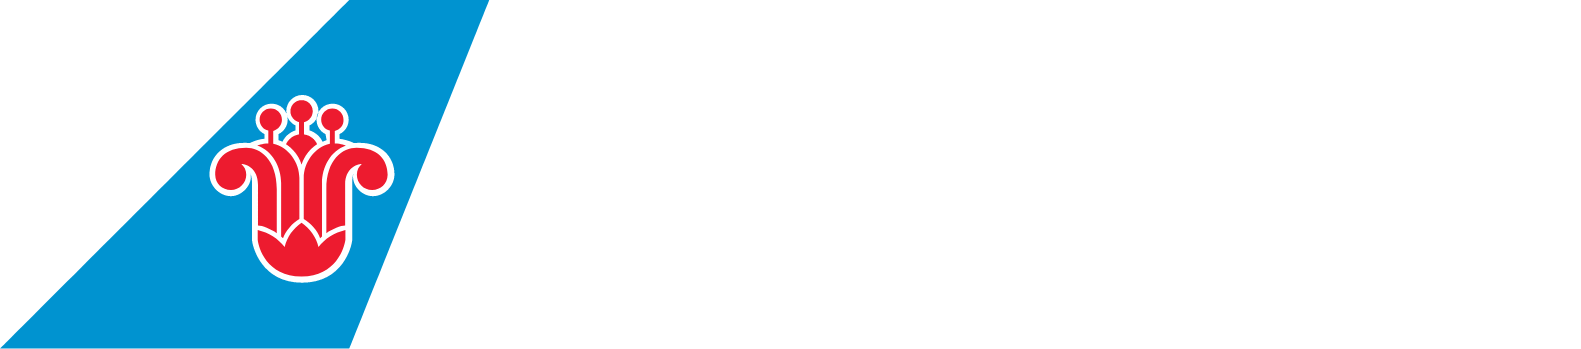 China Southern Airlines
 logo grand pour les fonds sombres (PNG transparent)